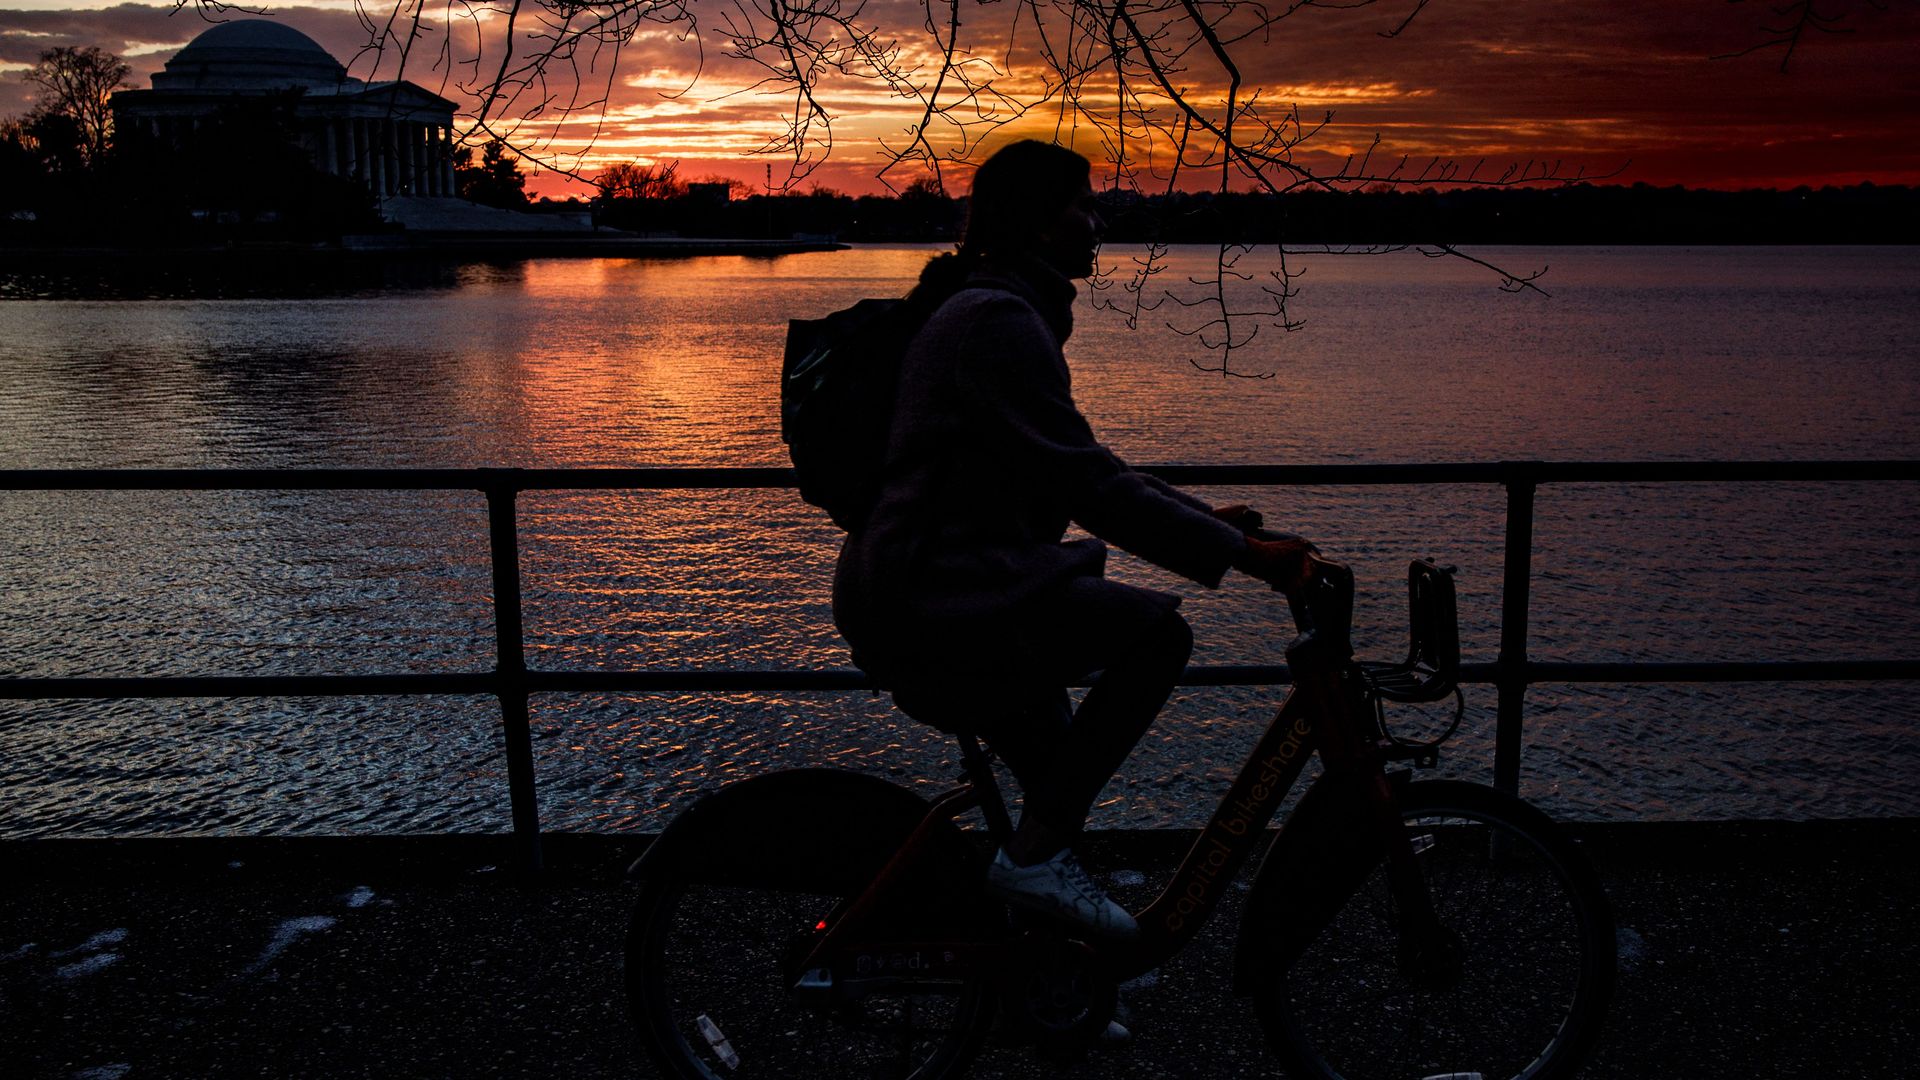 The silhouette of a person riding a bike in front of the Thomas Jefferson memorial at sunset.